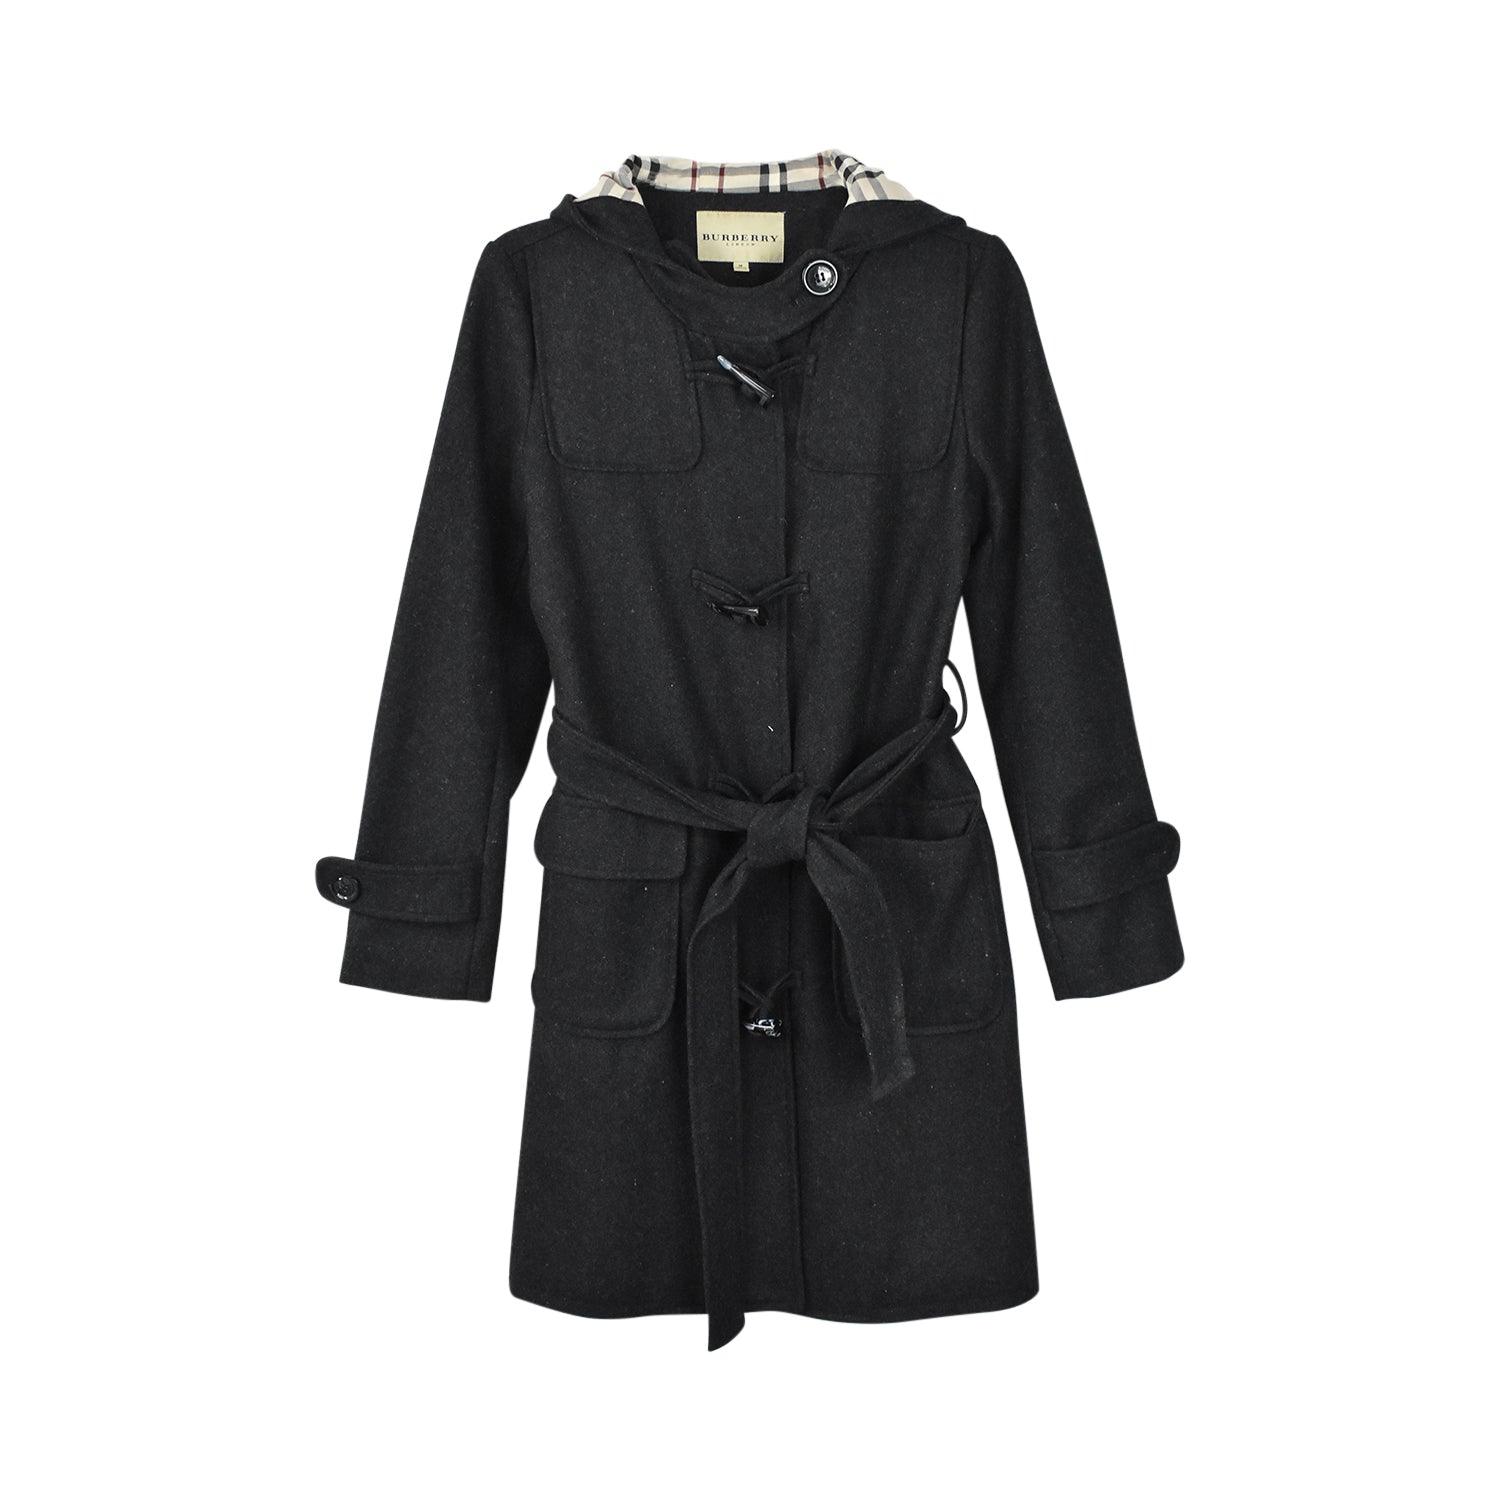 Burberry Coat - Women's M - Fashionably Yours